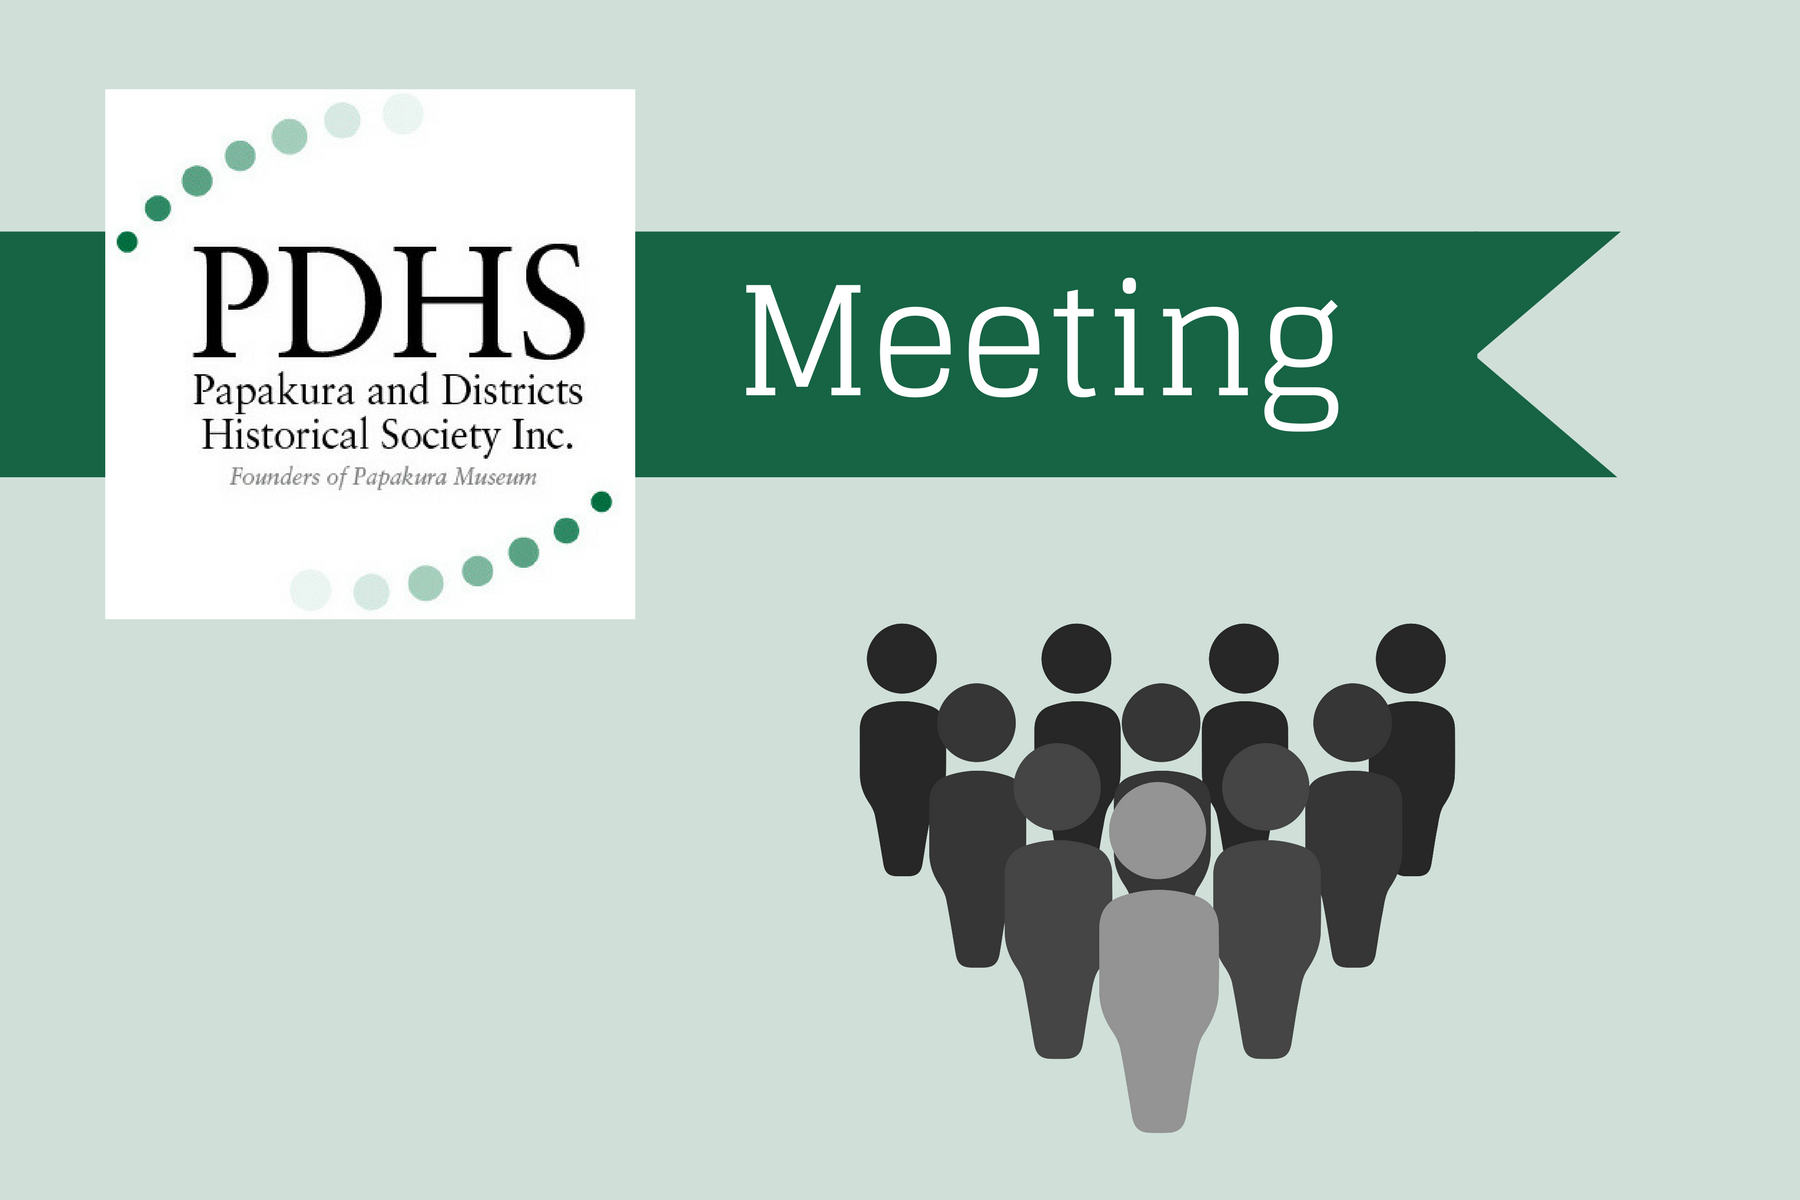 image for PDHS Meeting